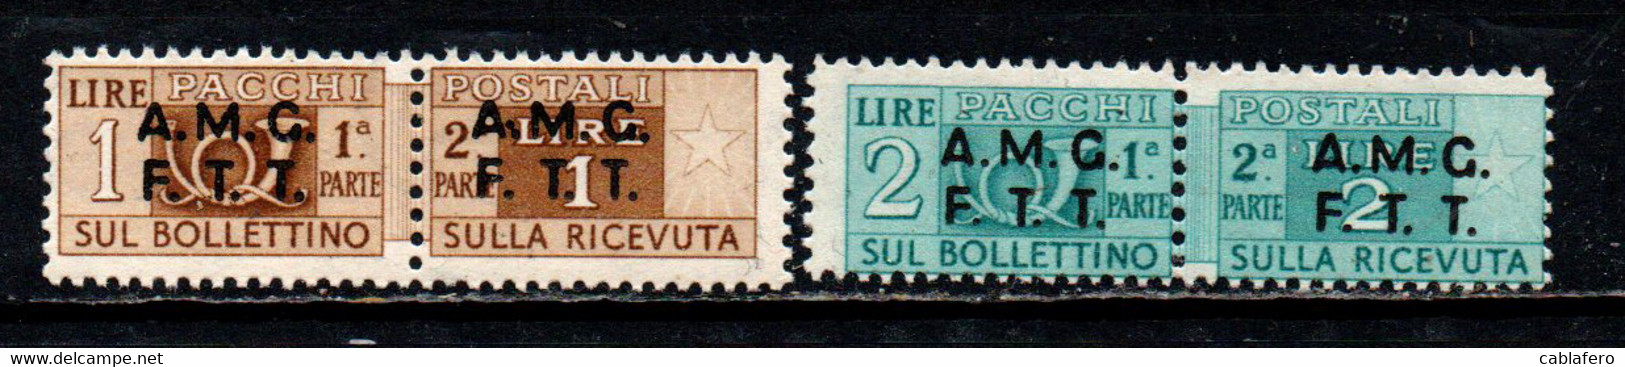 TRIESTE - AMGFTT - 1947 - PACCHI POSTALI - SOVRASTAMPA SU DUE LINEE - 1 E 2 LIRE - MNH - Postal And Consigned Parcels